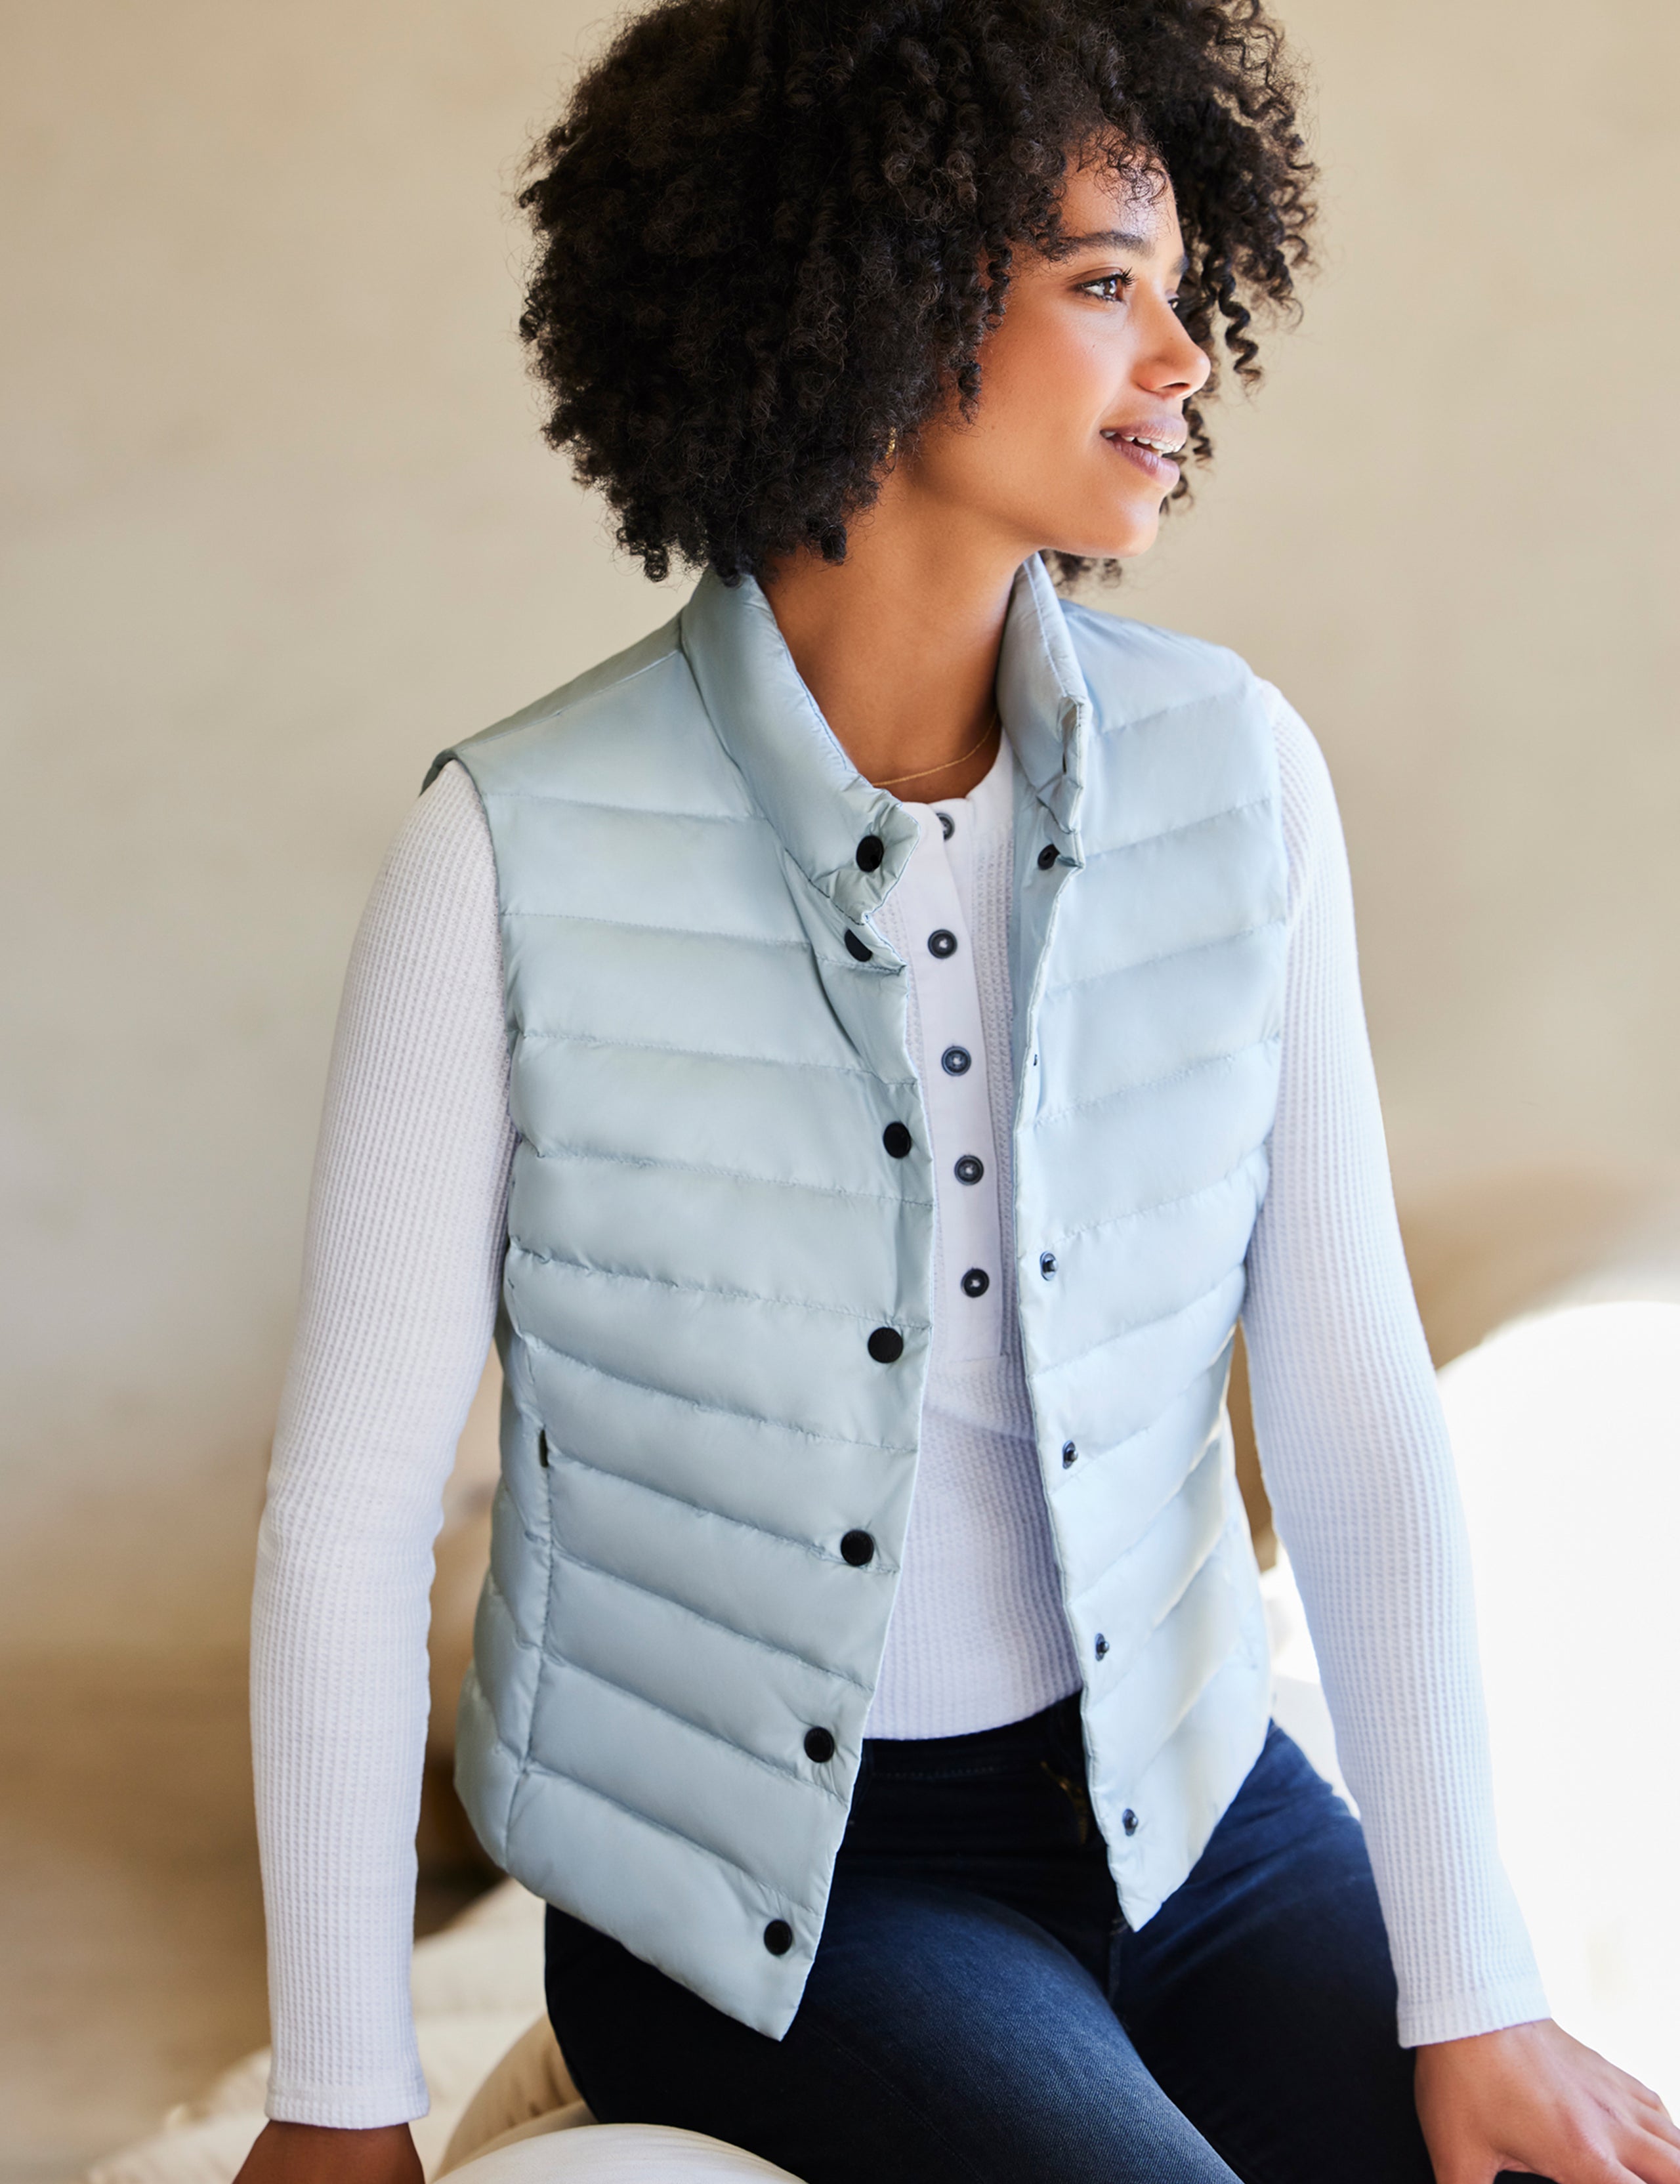 woman wearing blue vest from AETHER Apparel